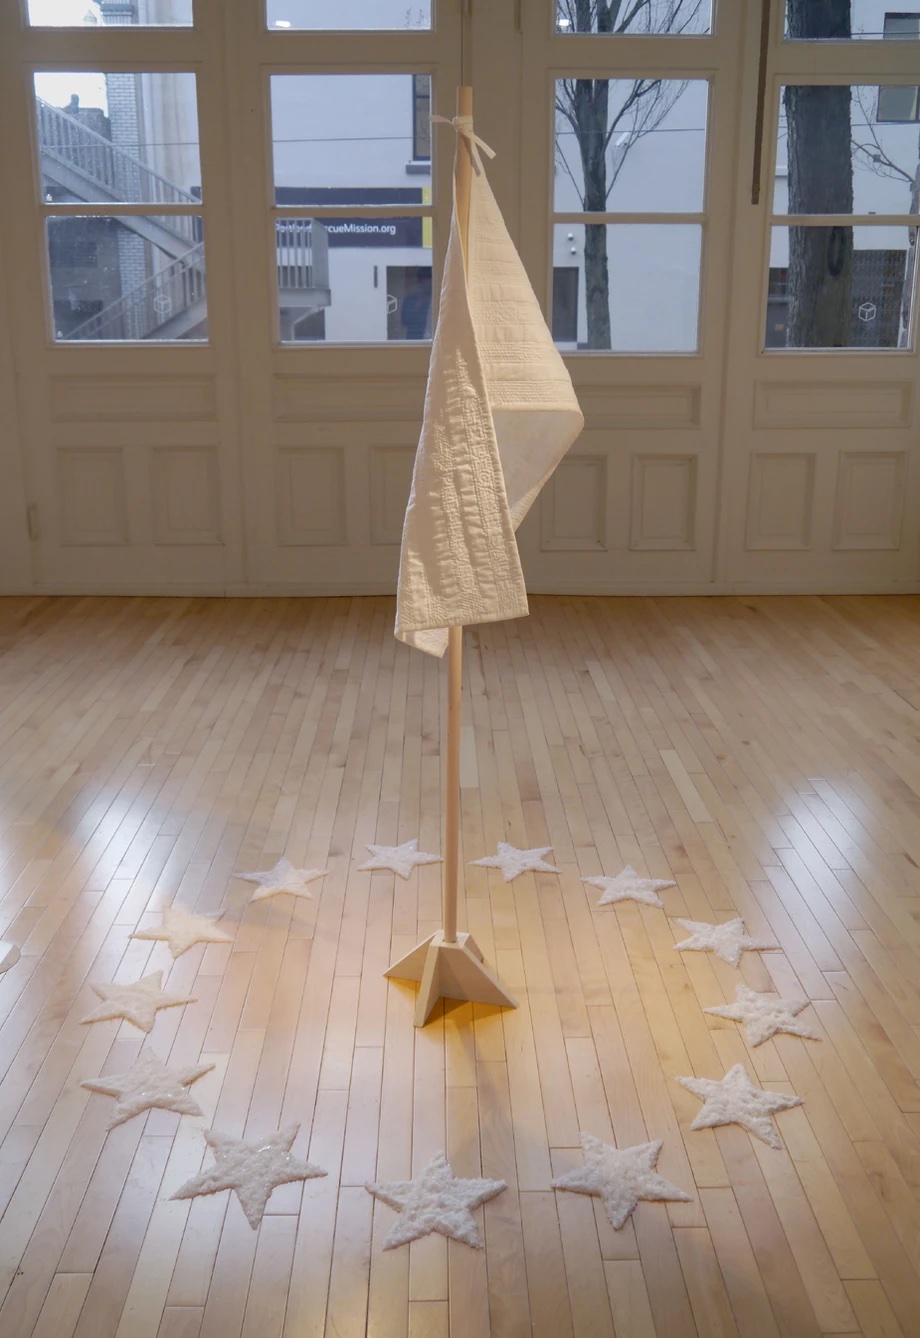 photo of a white flag on a short flag stand surrounded on the floor by salt stars